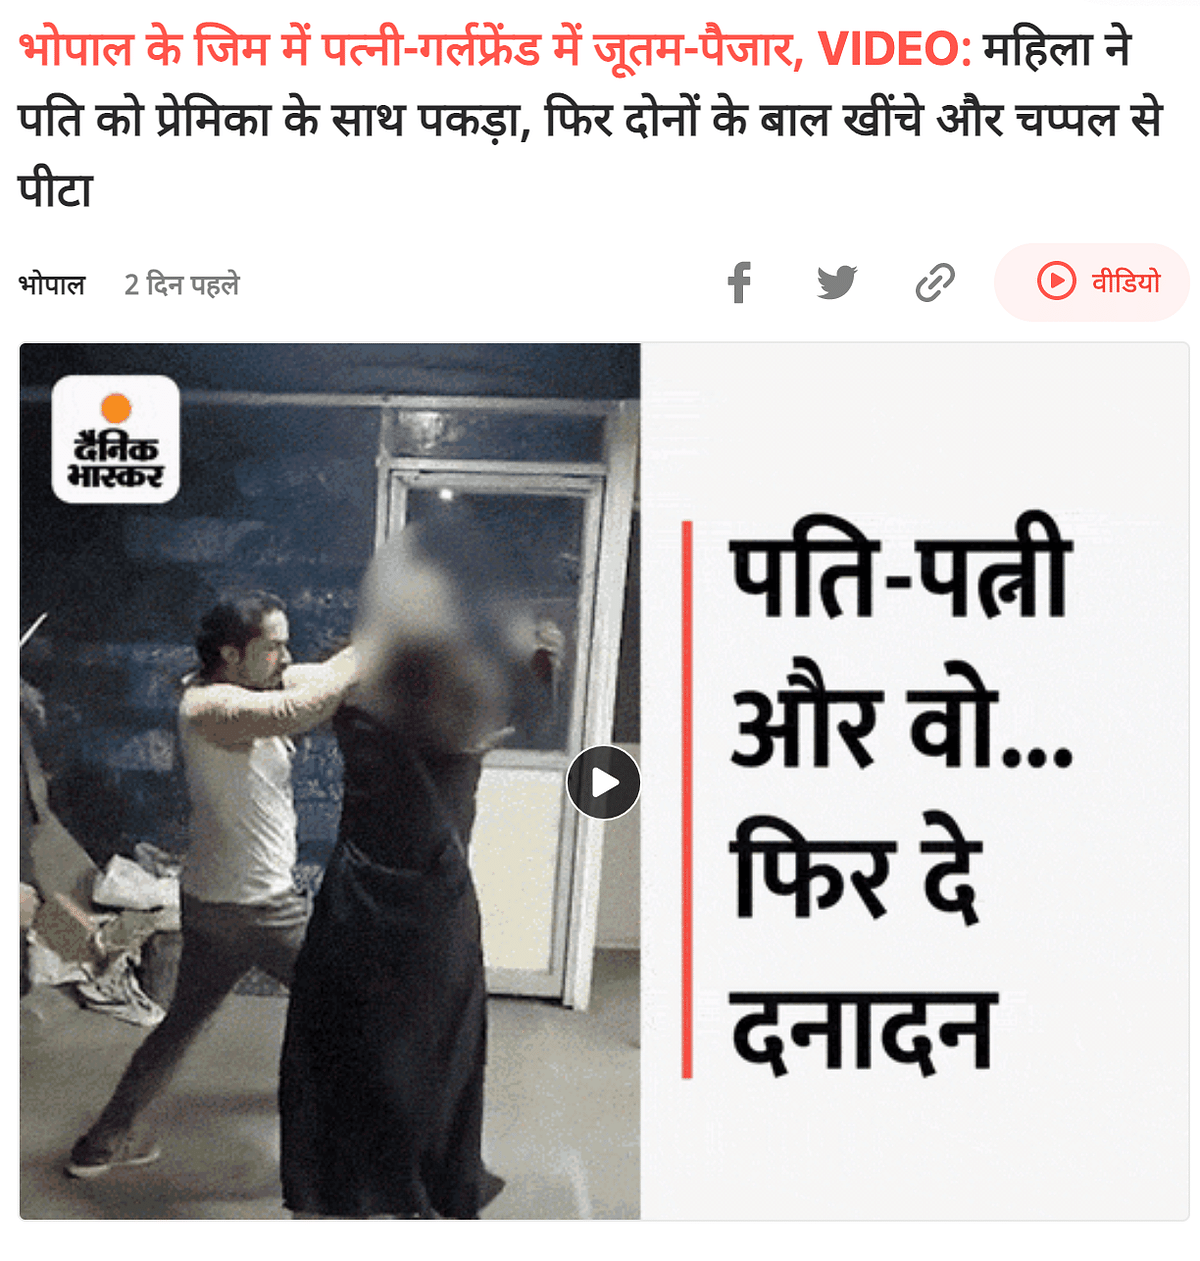 The video is from Koh-e-Fiza area in Bhopal and involves a brawl due to alleged extra-marital affair.